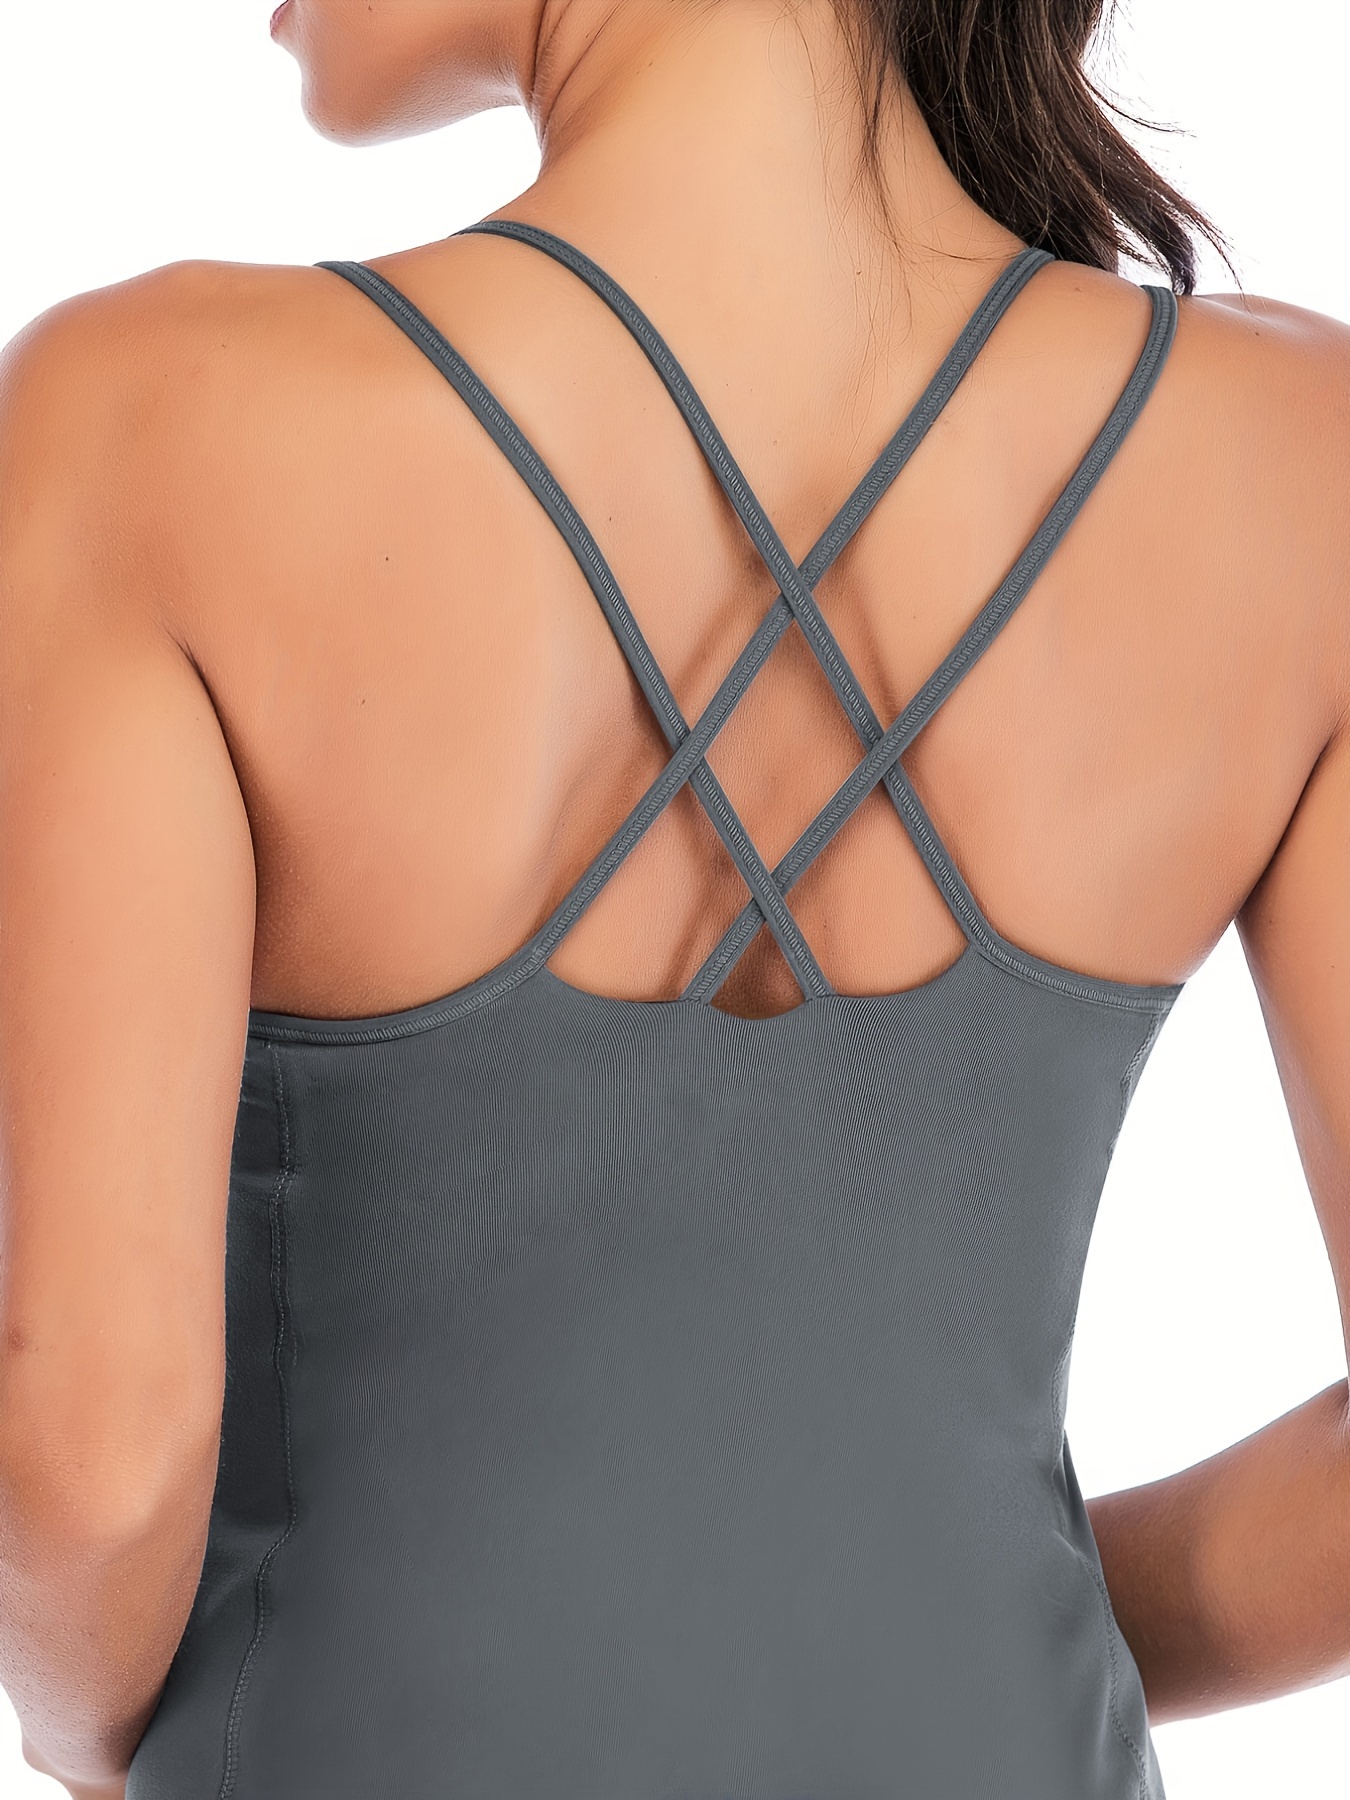 Yoga Tops With Built In Bra